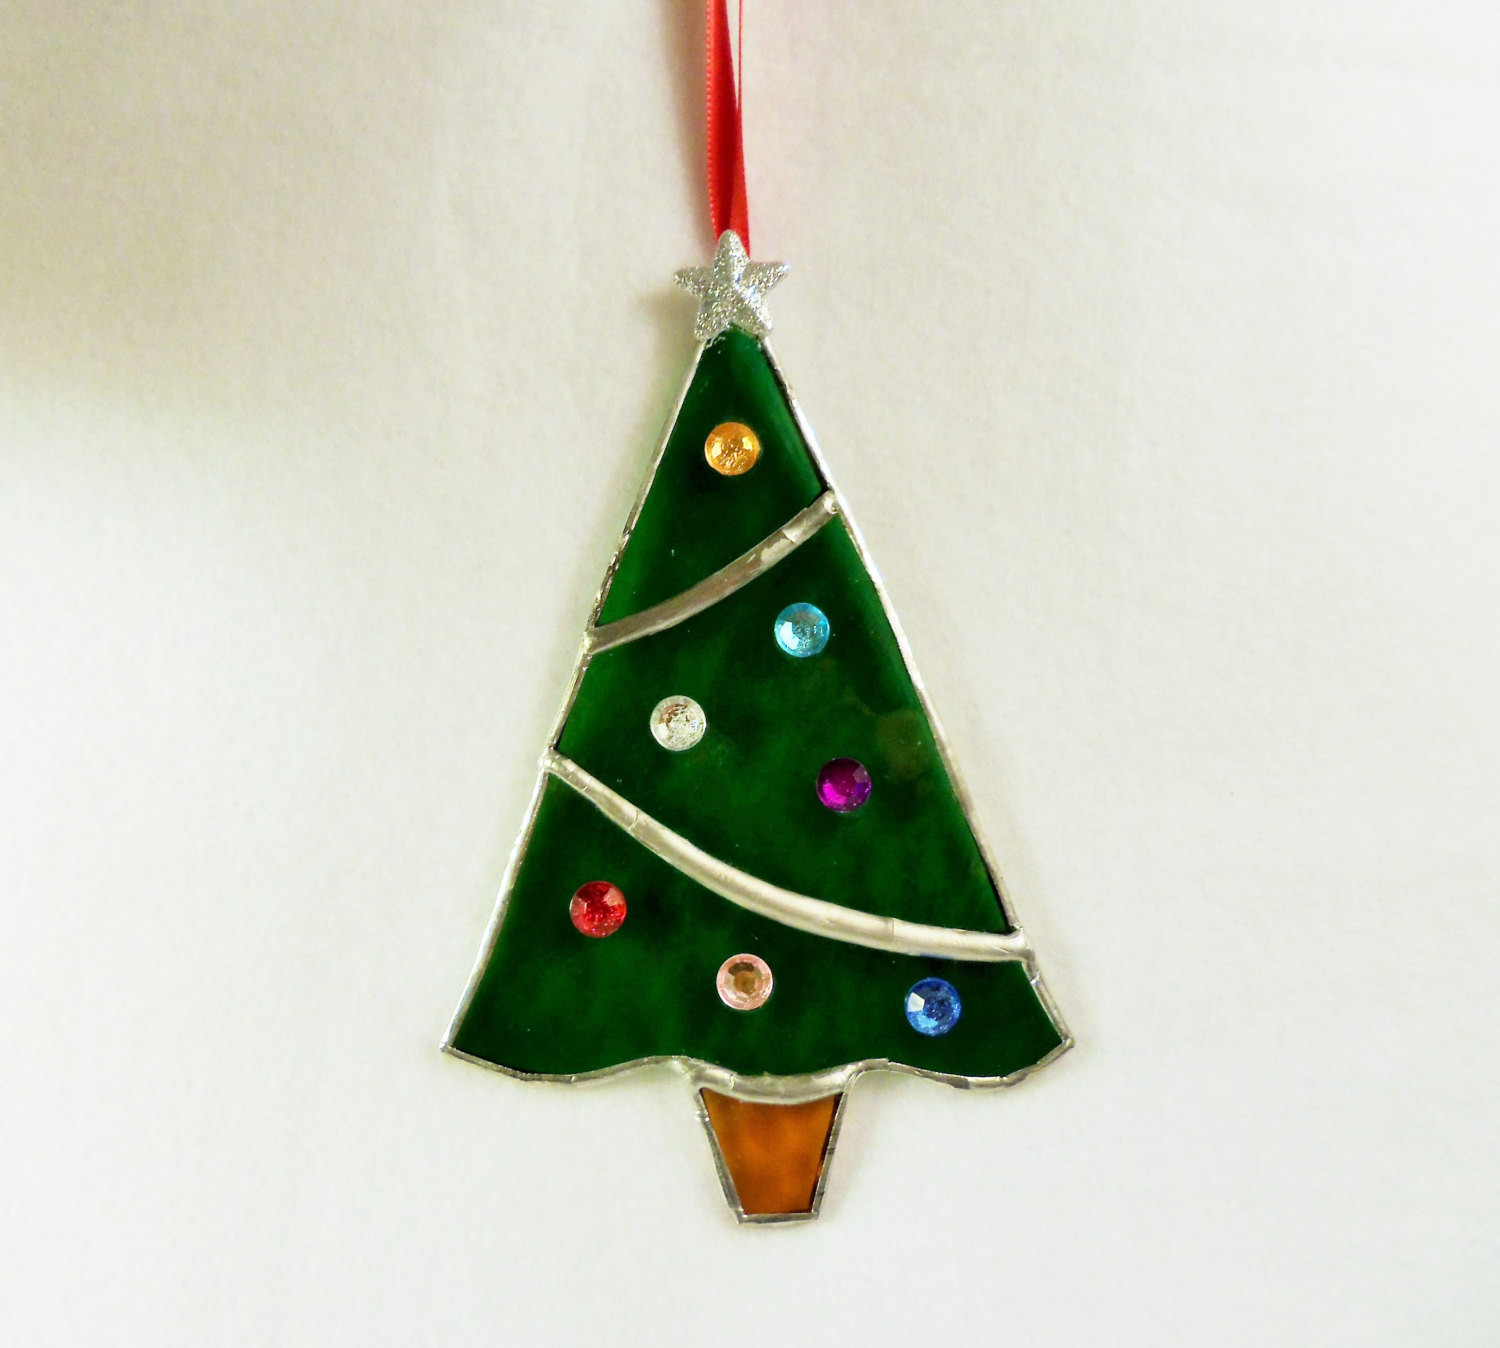 Stained Glass Christmas Tree Lamp
 Stained Glass Christmas Tree Holiday Ornament Sun Catcher